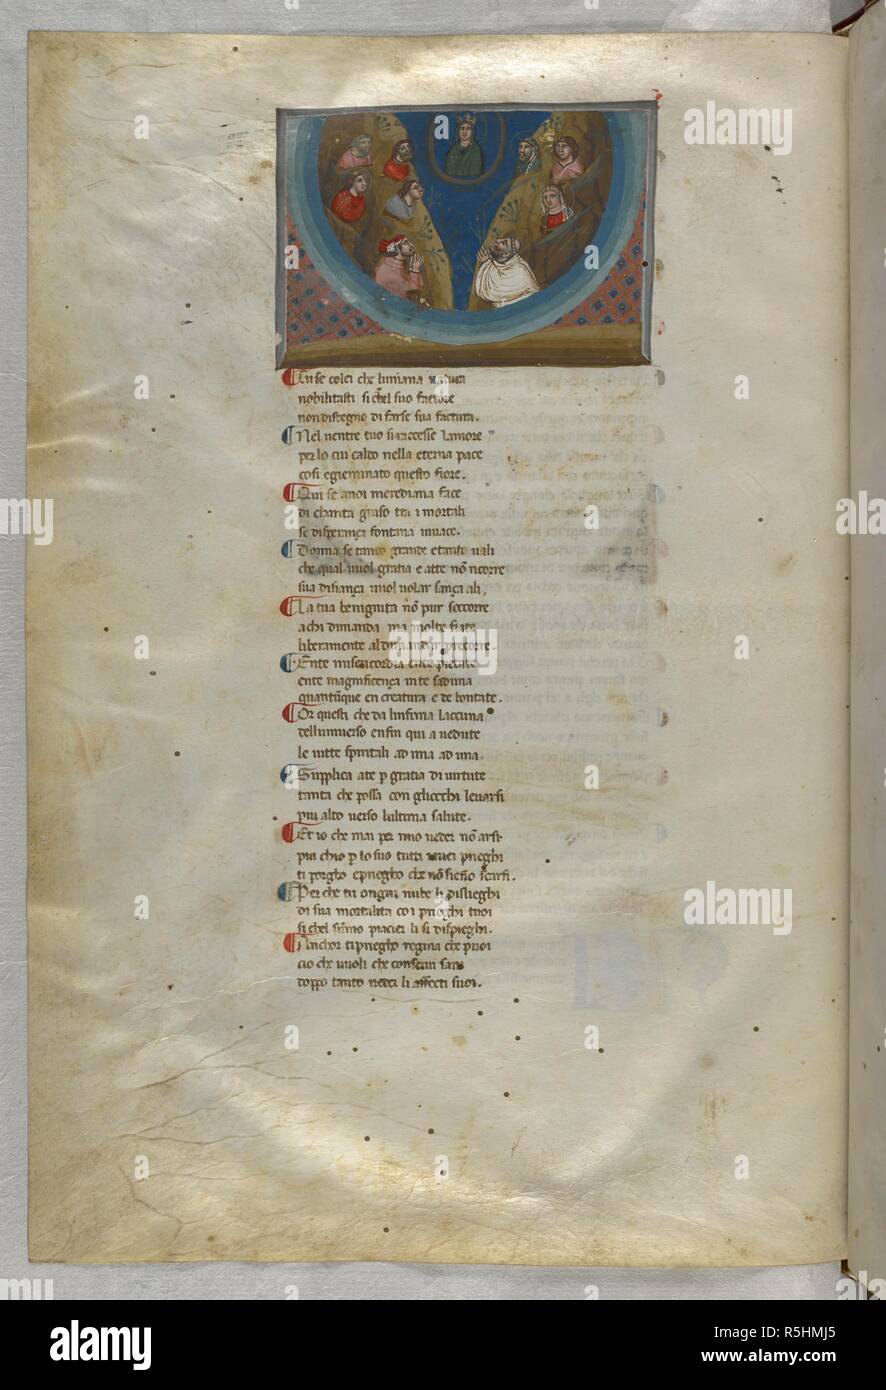 Paradiso: Dante and Bernard pray to Mary. Dante Alighieri, Divina Commedia ( The Divine Comedy ), with a commentary in Latin. 1st half of the 14th century. Source: Egerton 943, f.184v. Language: Italian, Latin. Stock Photo